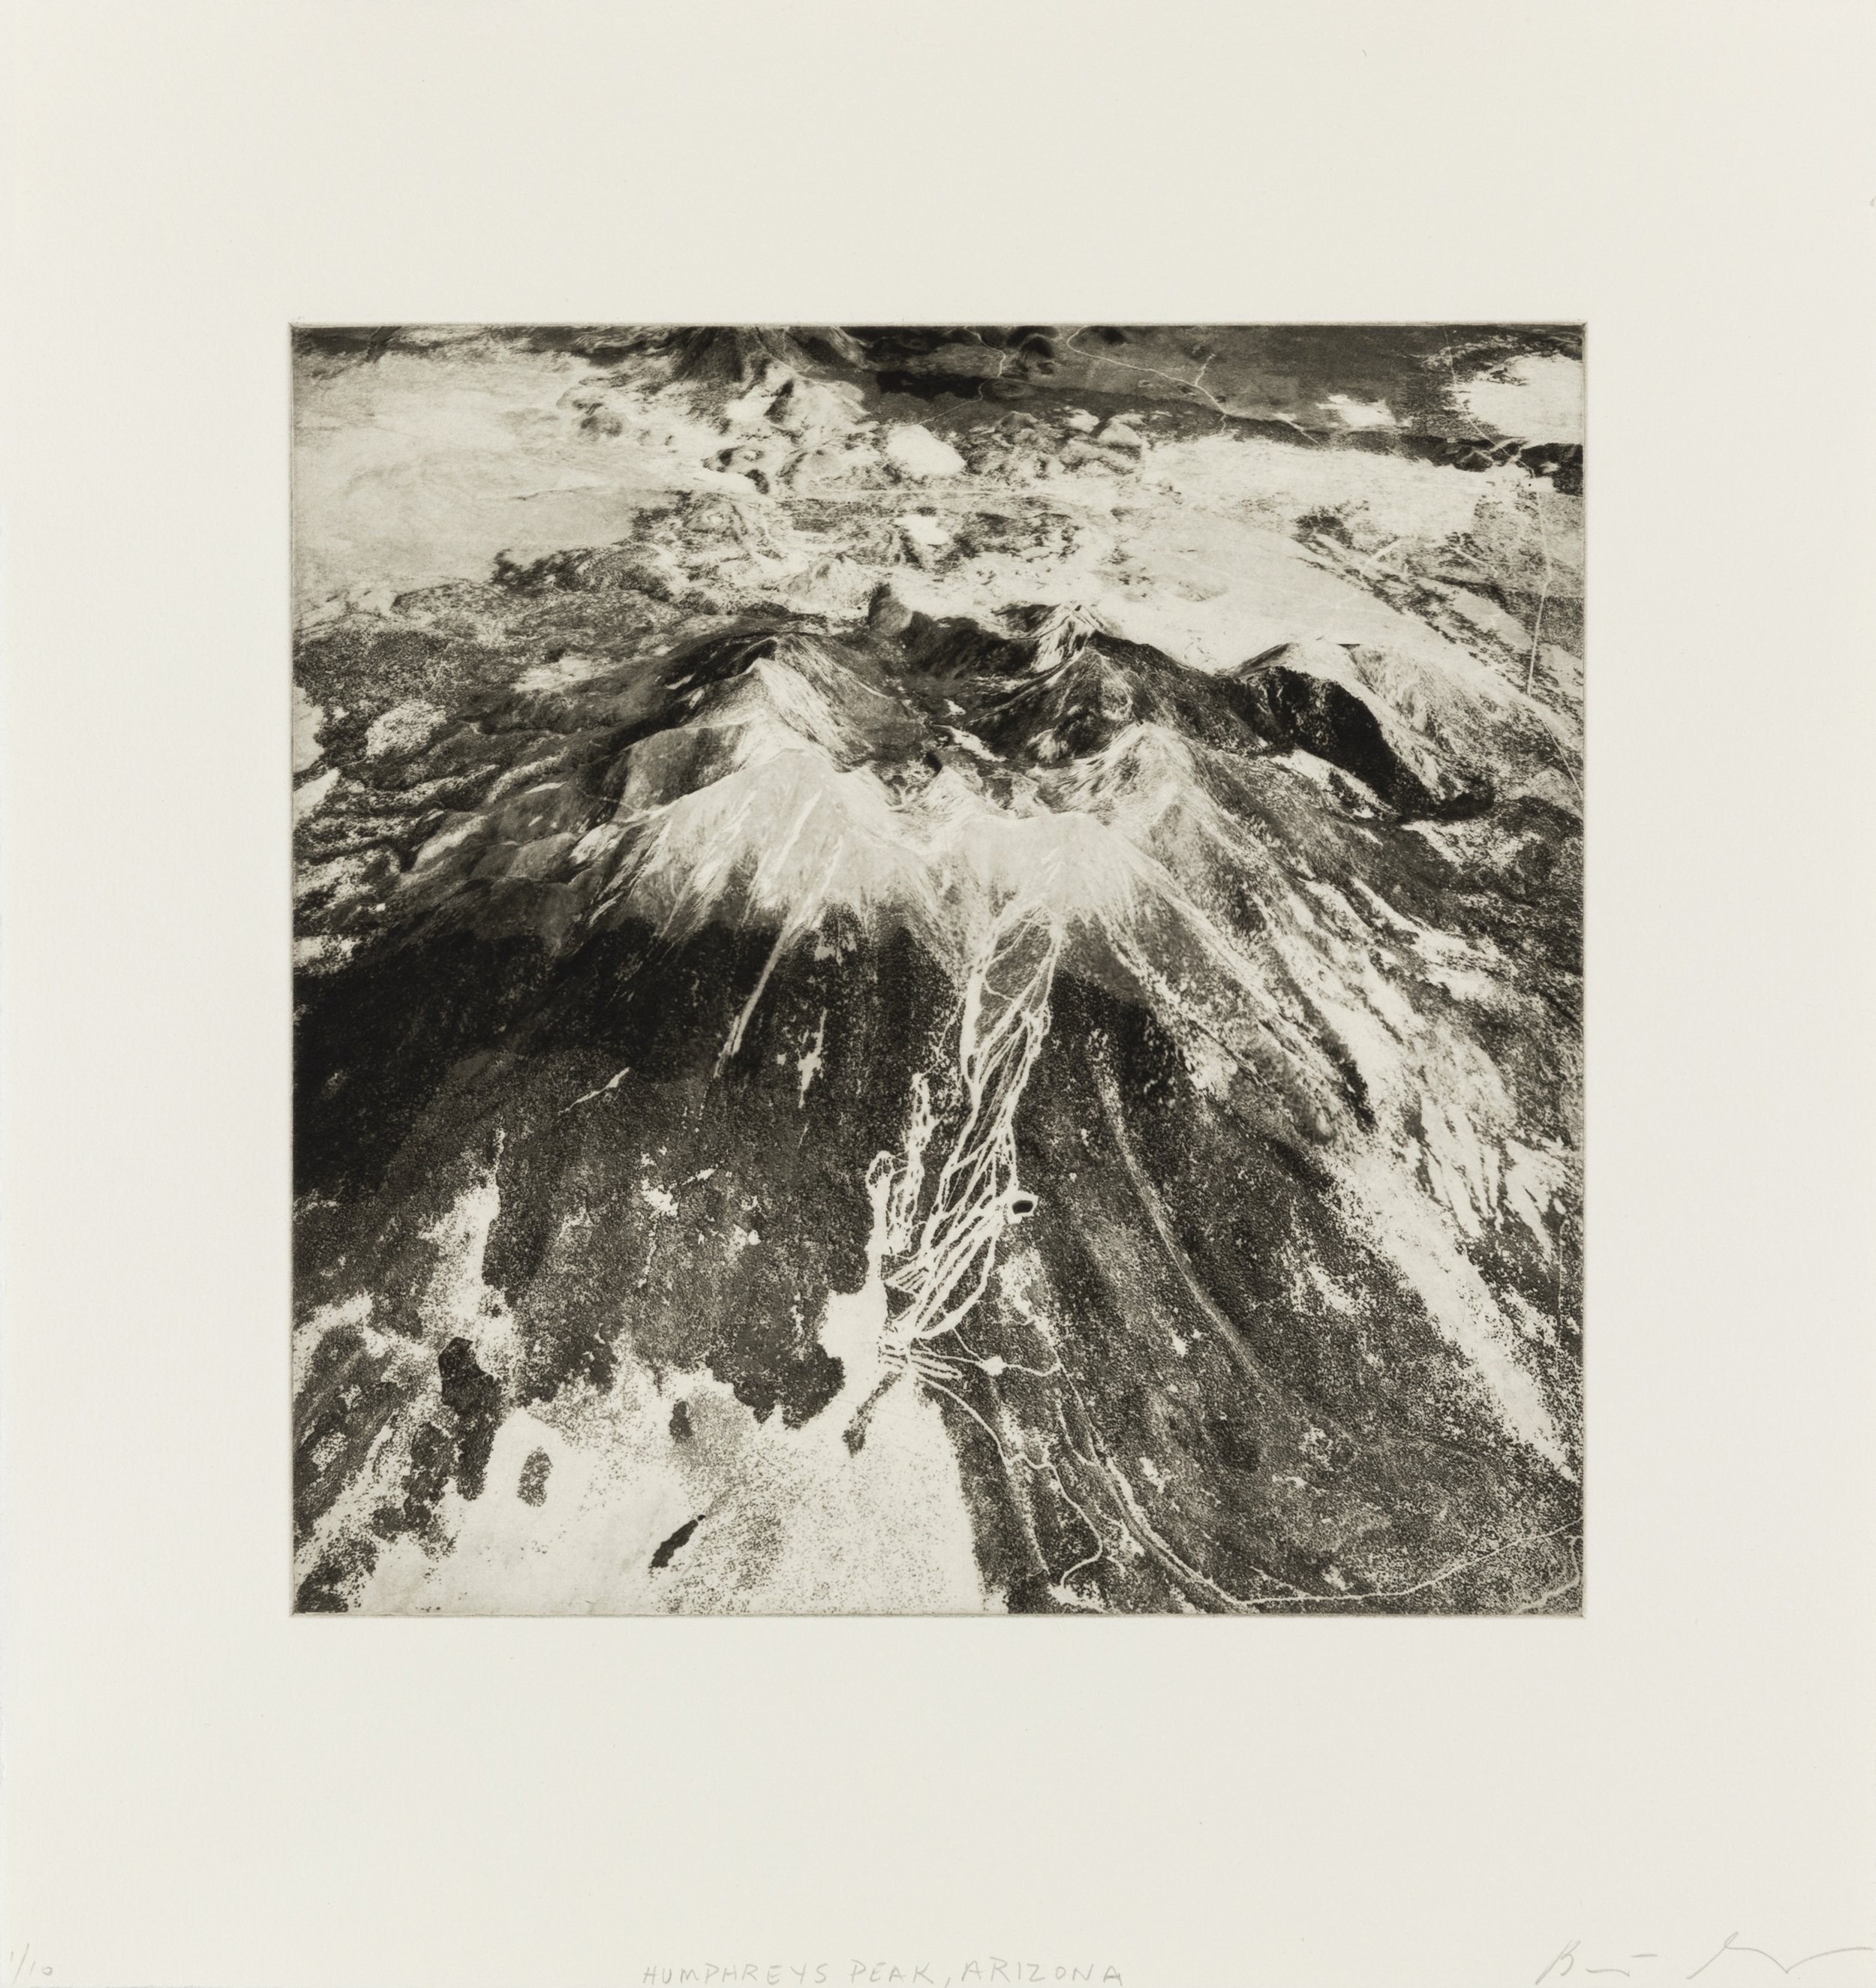    Humphreys Peak, Arizona, 2021   Copperplate photogravure etching on cotton rag paper, plate size; 10.6 x 10.6, paper size; 16 x 15.5, edition 10  